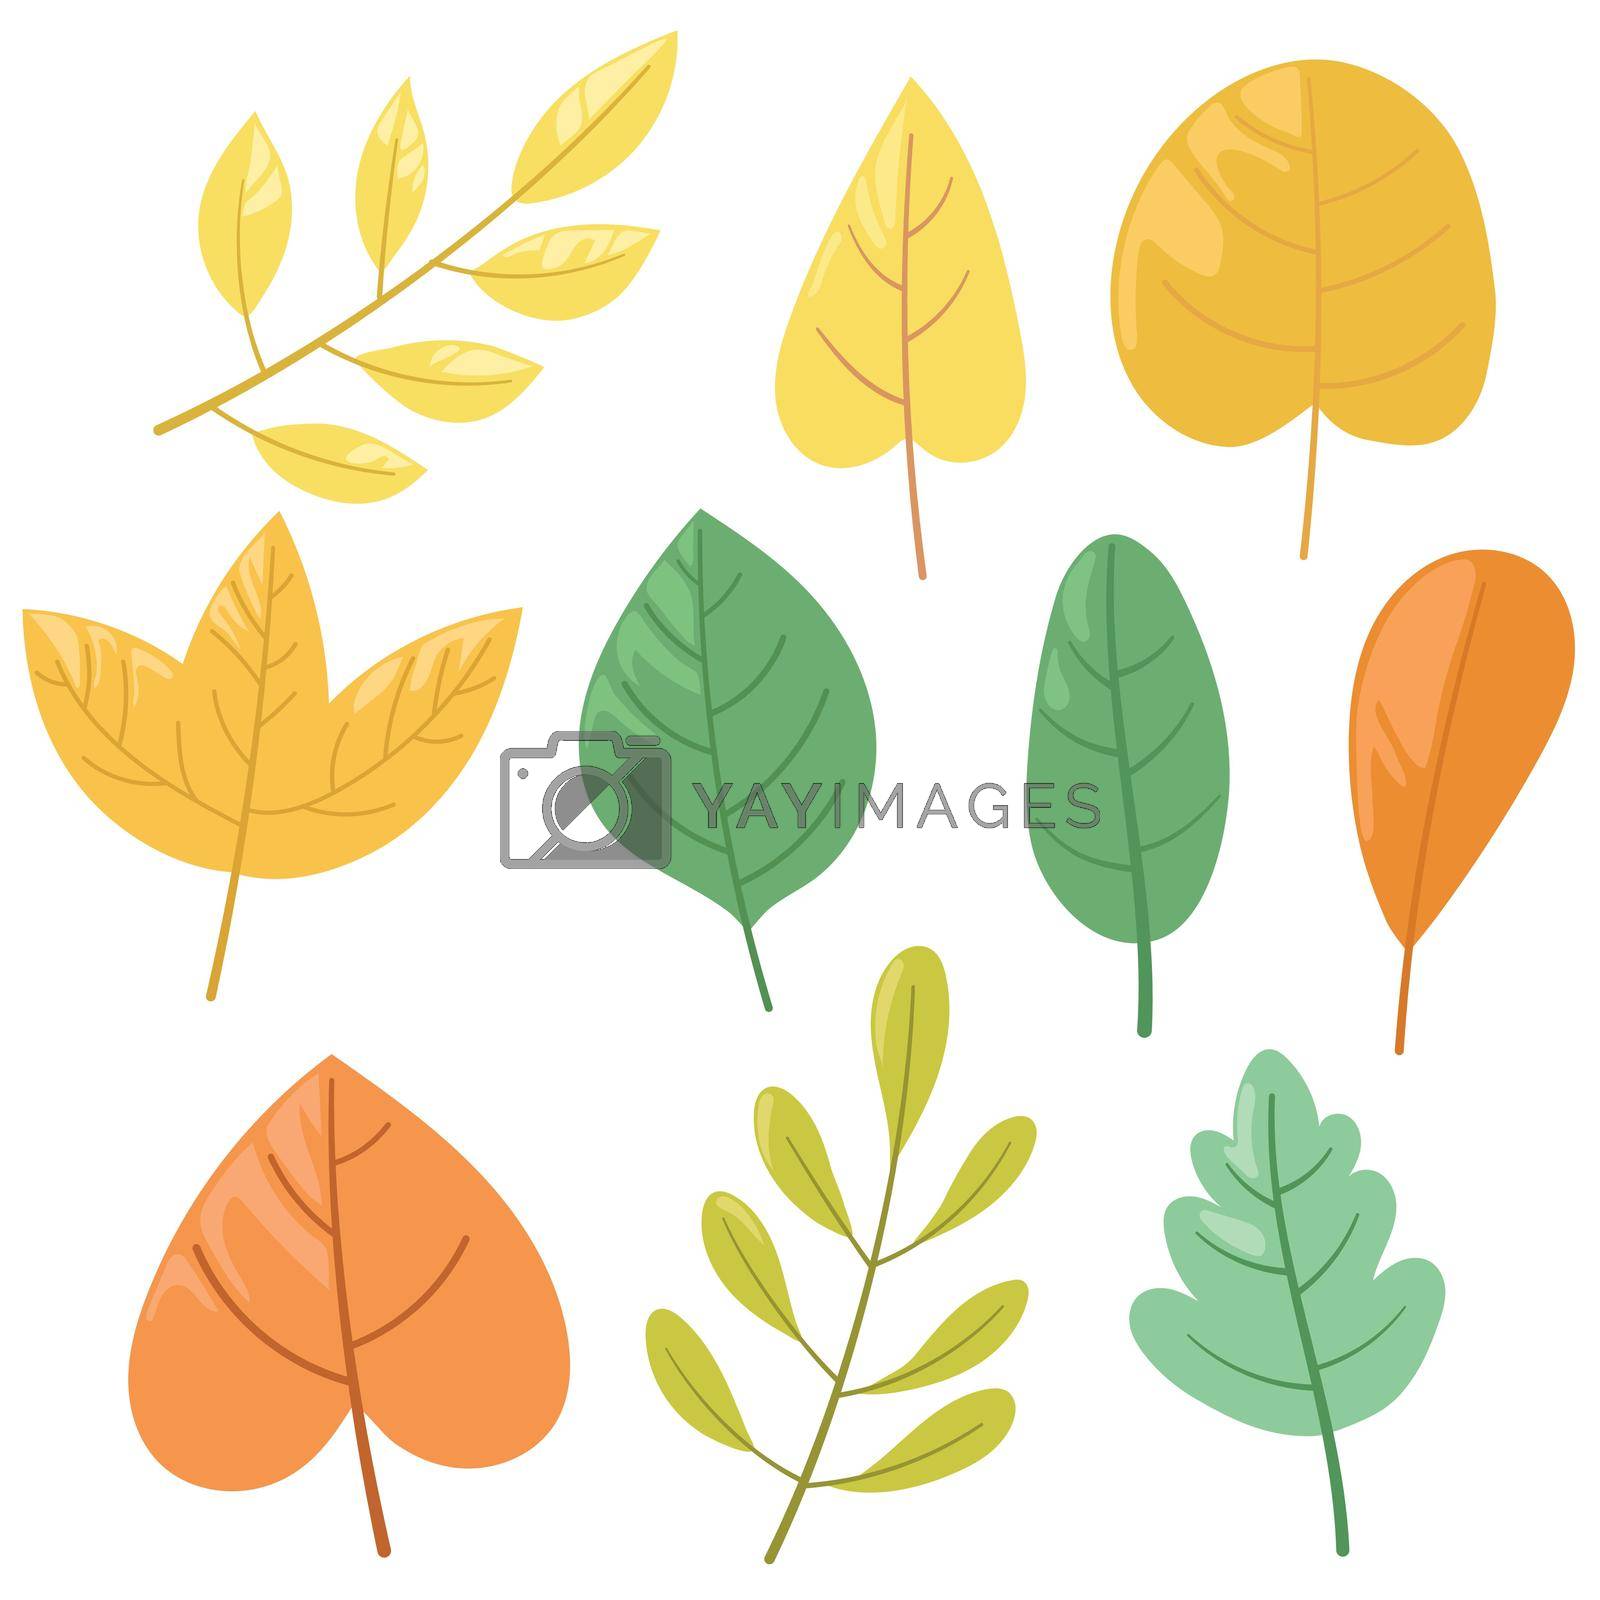 Royalty free image of Leaf cartoon in flat style by valueinvestor